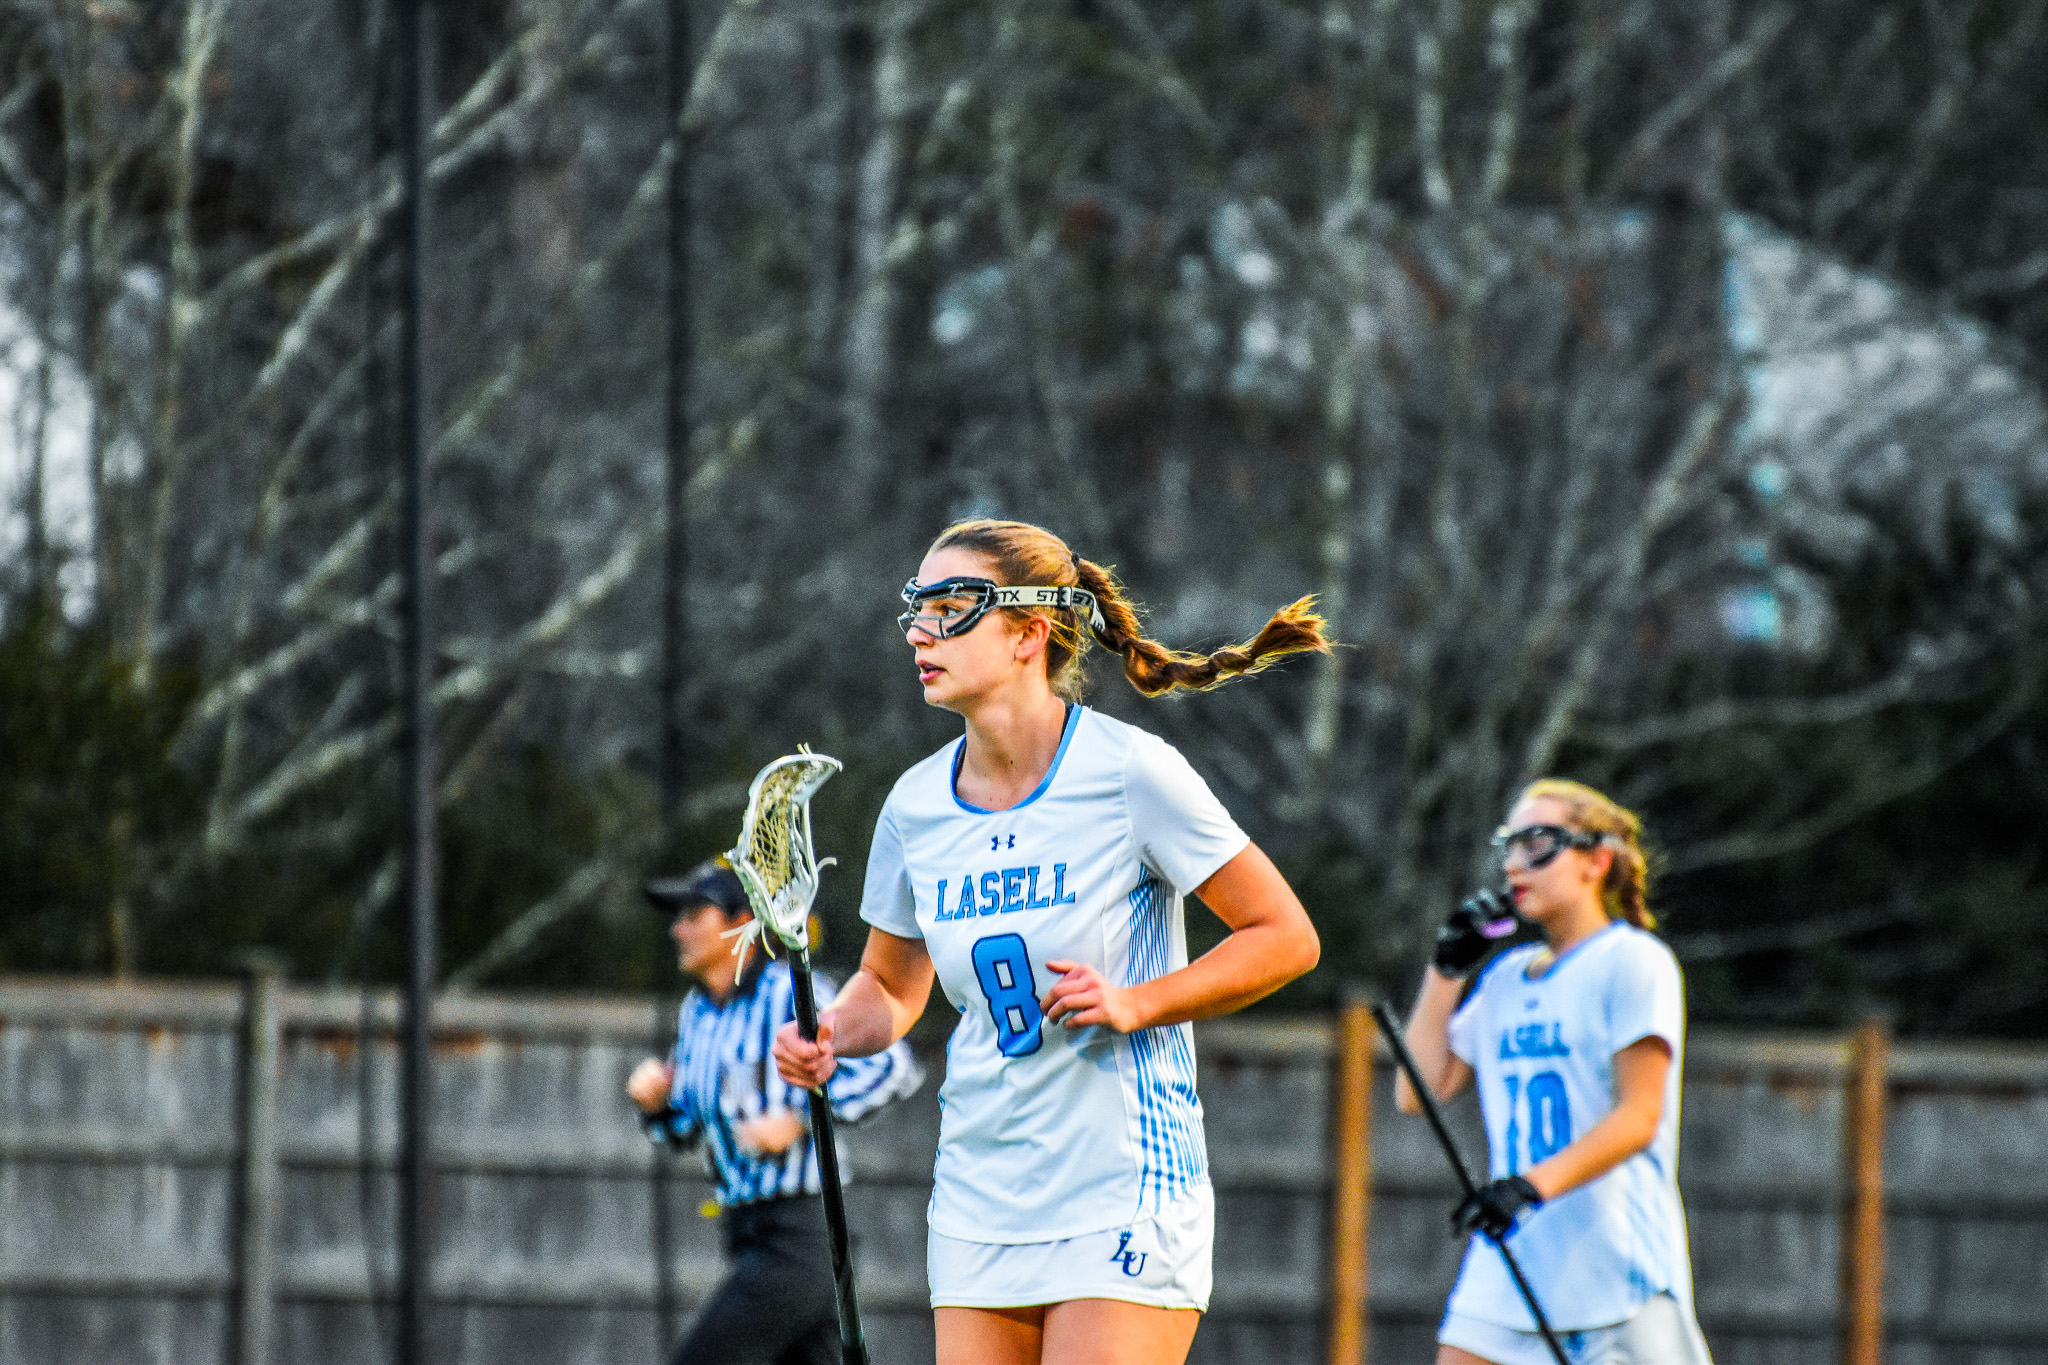 WLax: Lasers Climb to 4-2 on the Season After 17-5 Win over RIC